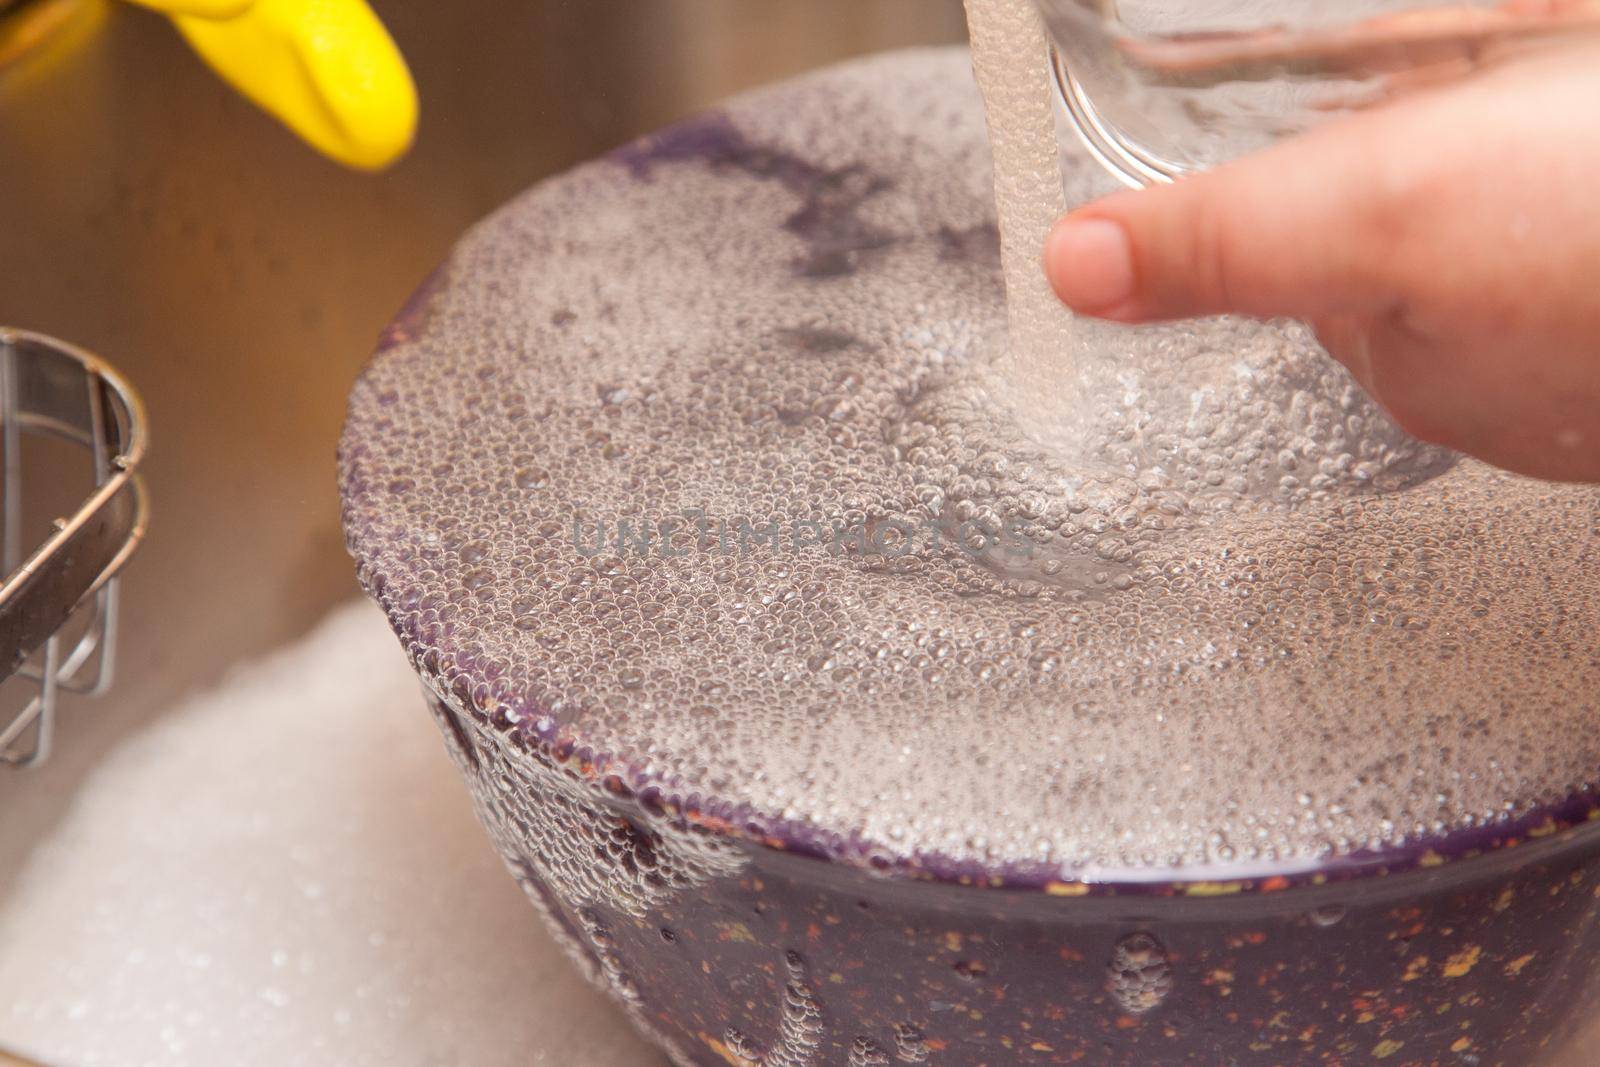 A bowl being washed bubbles up with dish liquid